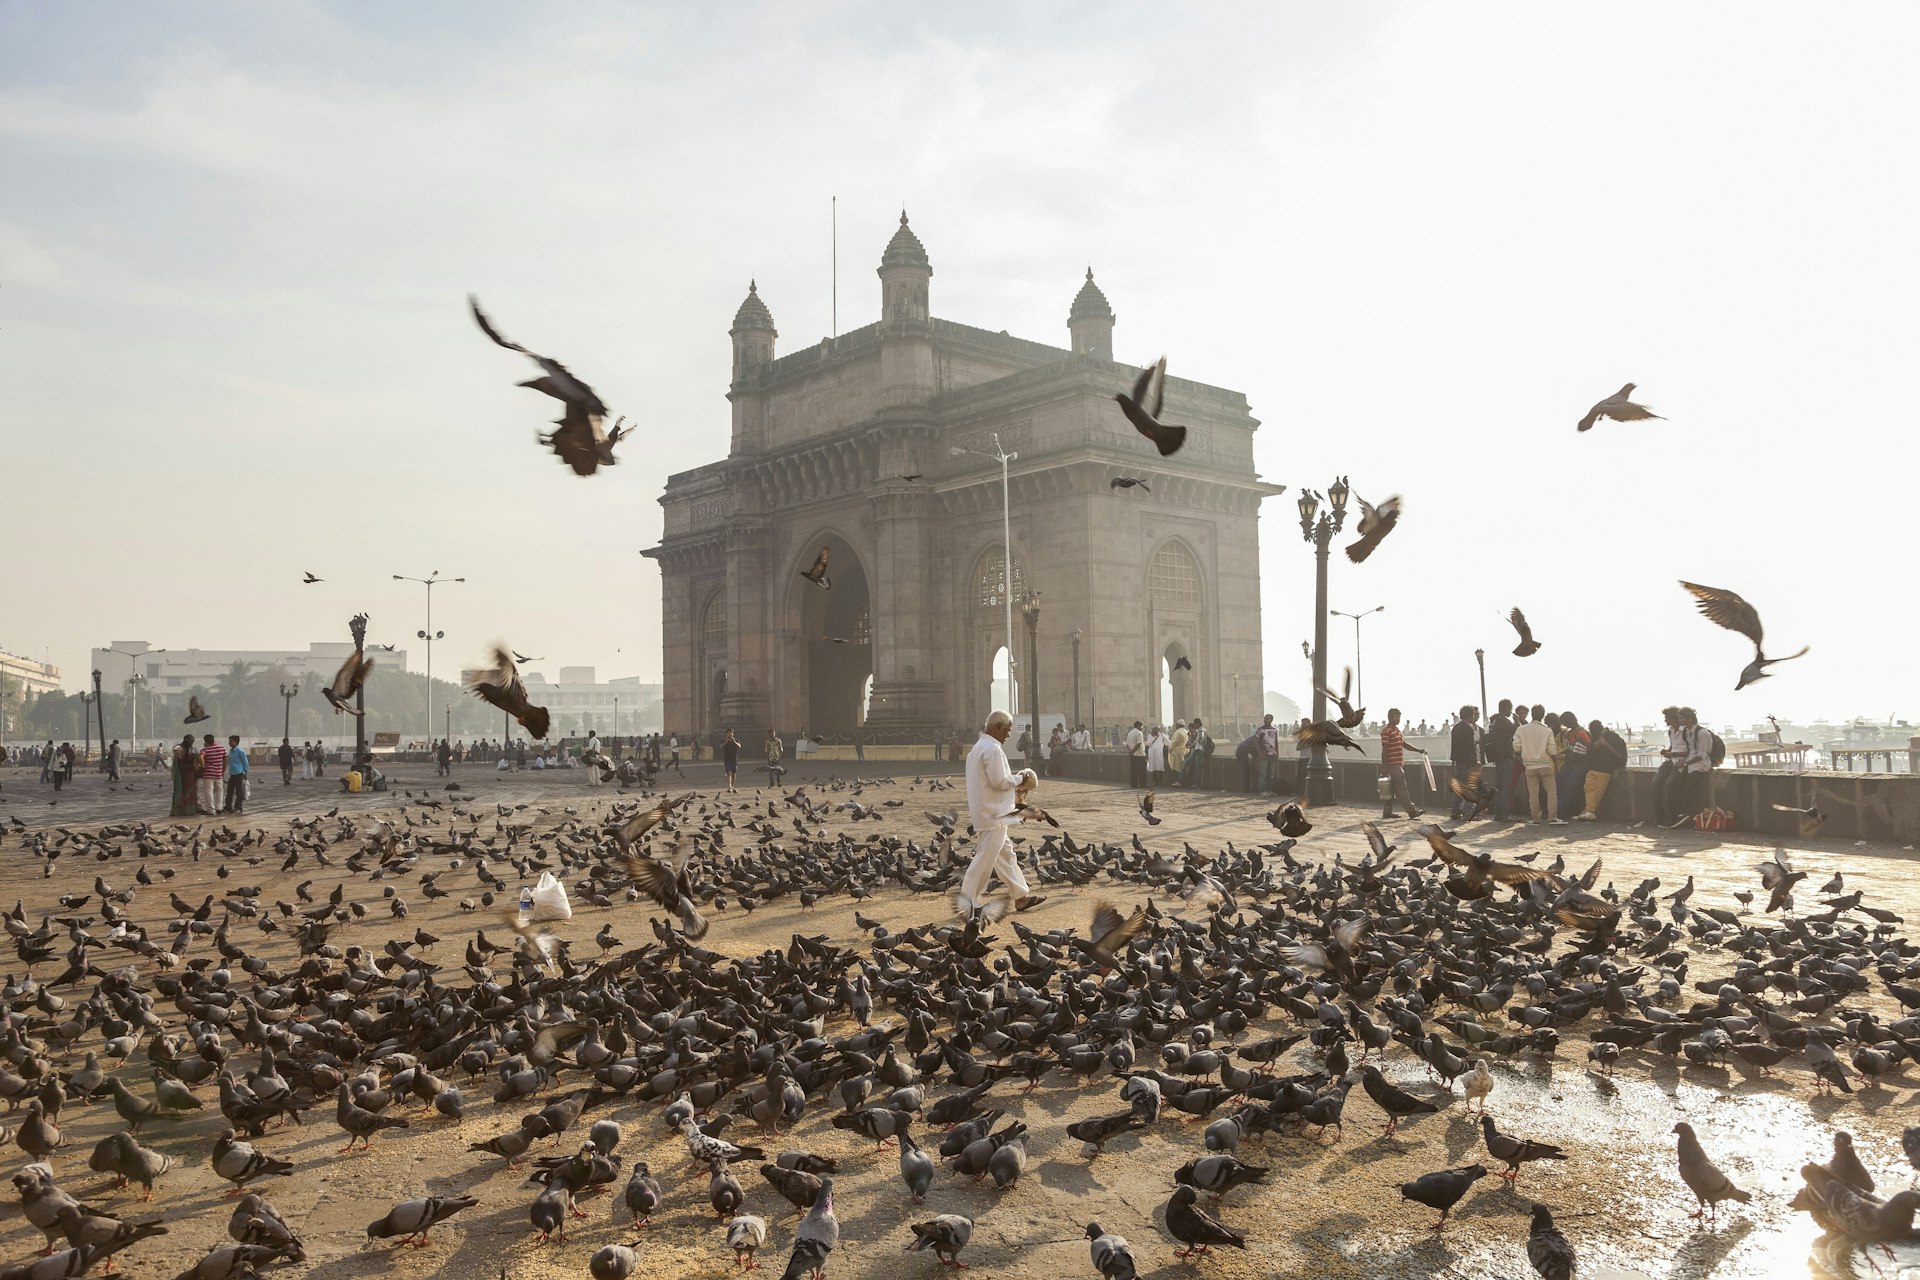 A lone figure, dressed all in white, walks through a flock of pigeons in front of the Gateway of India, a monumental stone arch, in Mumbai. Some of the pigeons have taken flight around the figure.